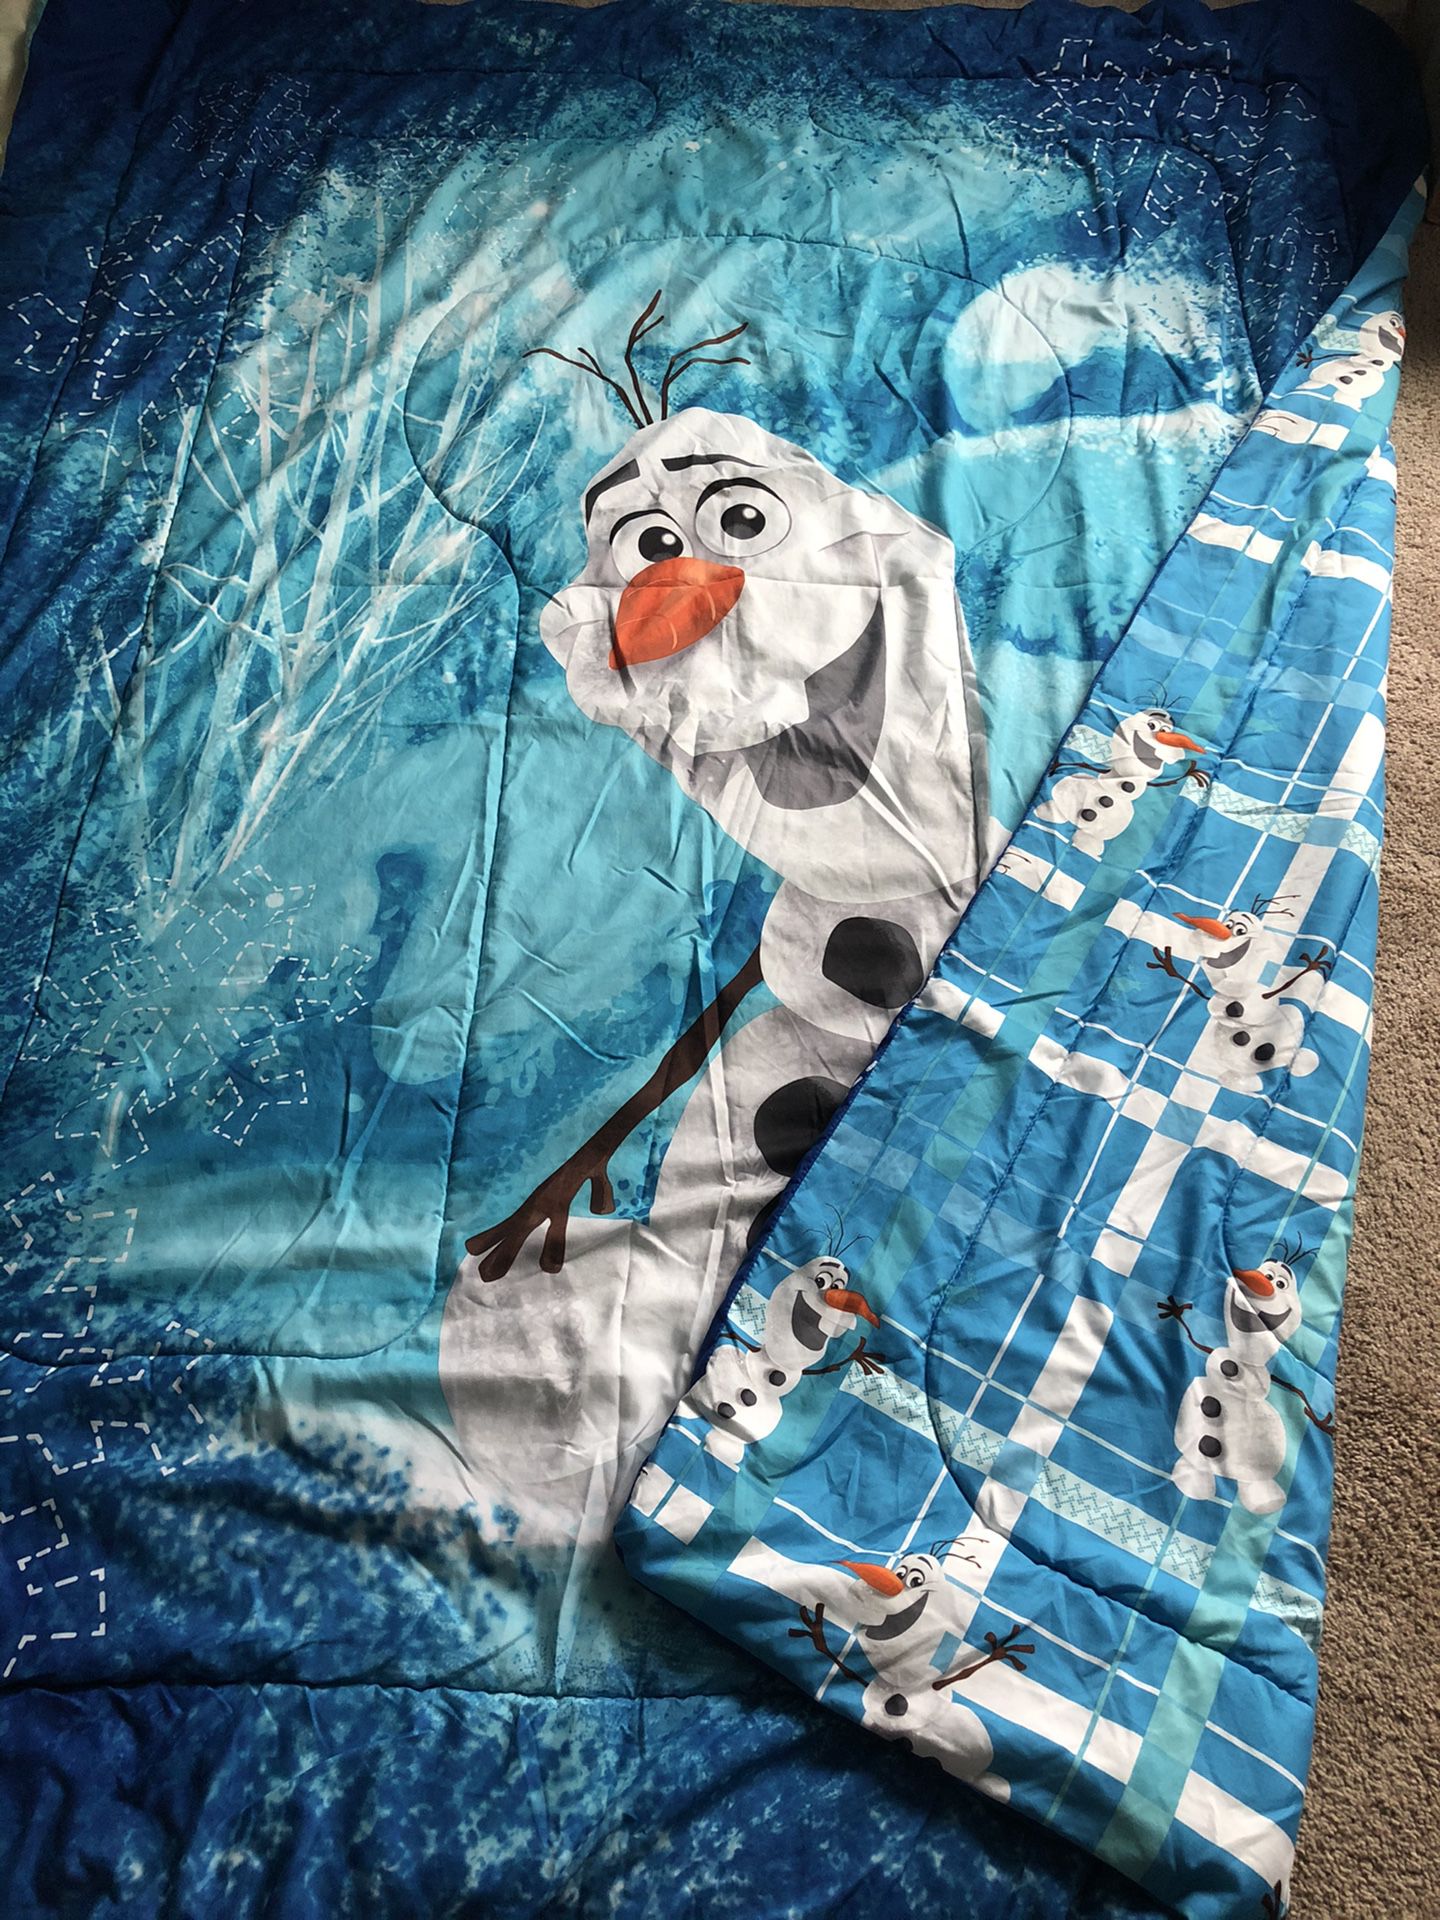 Official Disney Frozen “Olaf” Twin Size Reversible Comforter